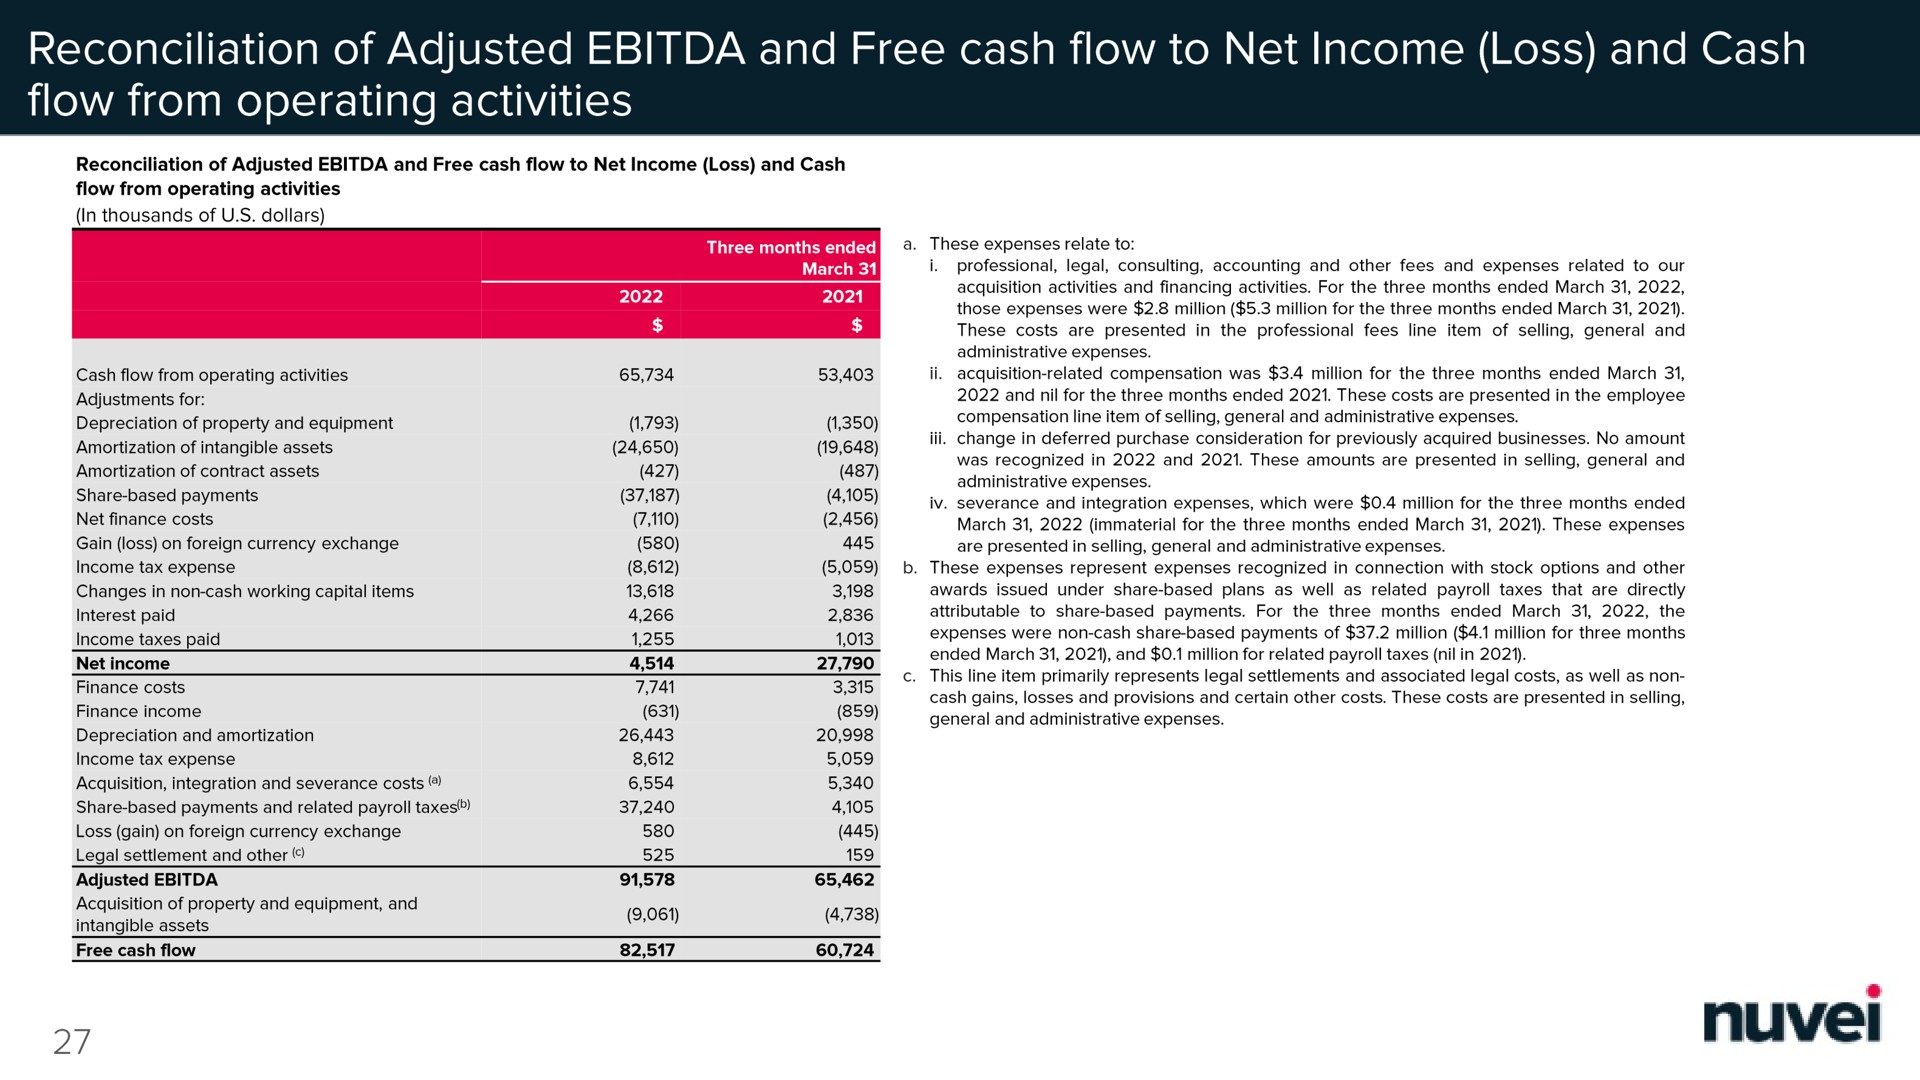 reconciliation of adjusted and free cash flow to net income loss and cash flow from operating activities | Nuvei